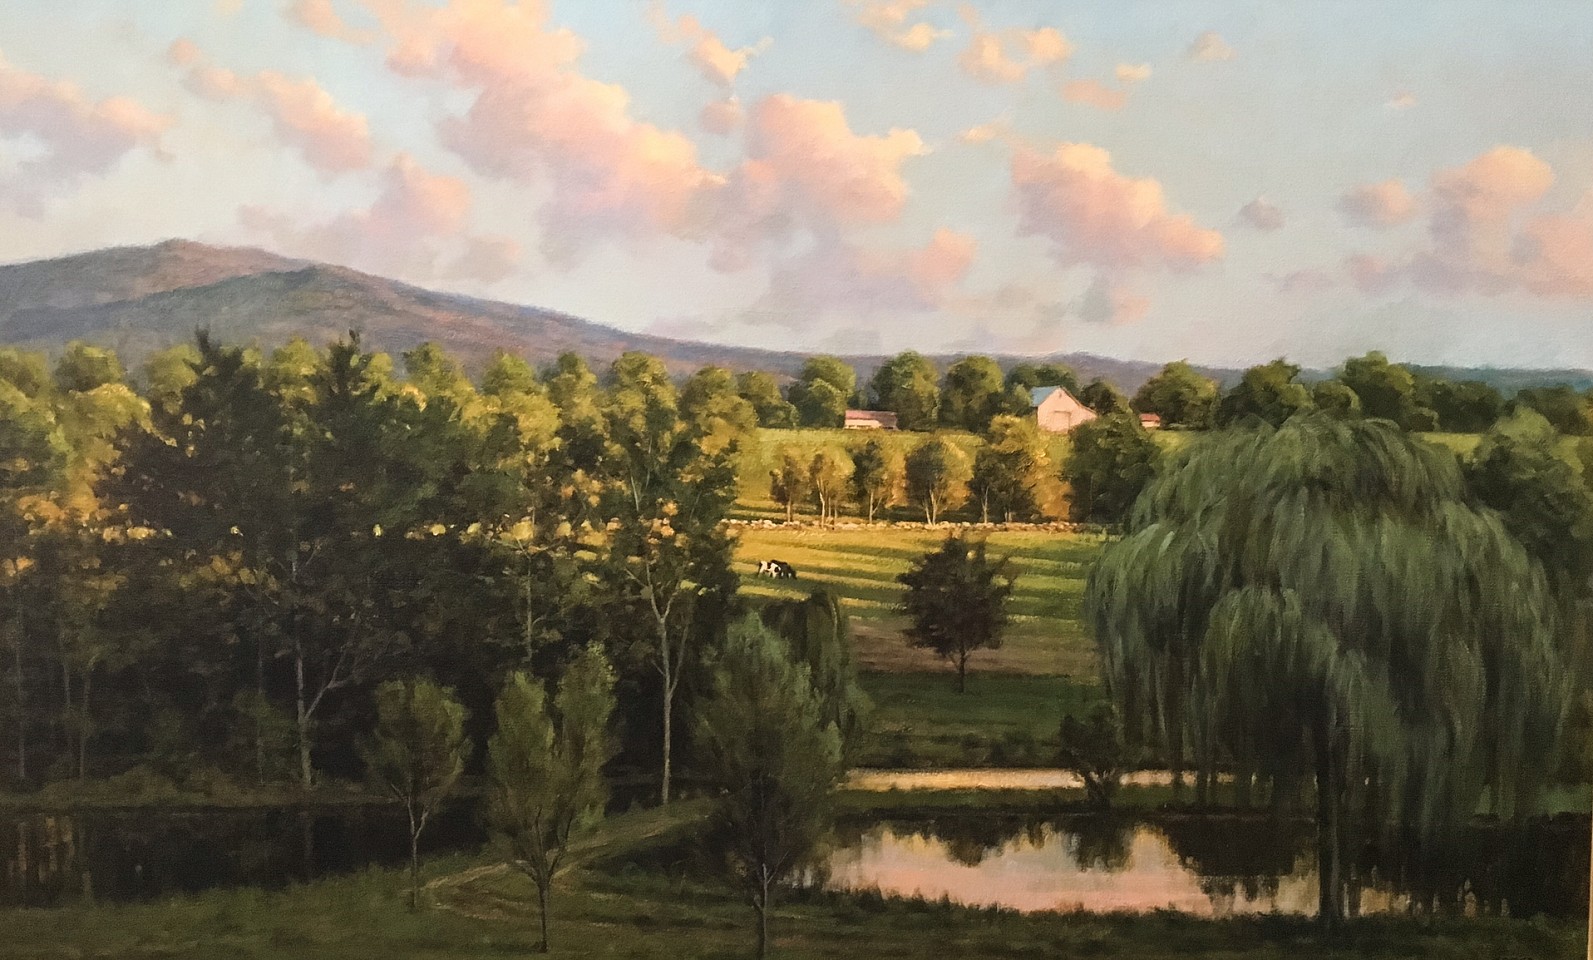 Frank Corso, Late Afternoon Long View, 2015
oil on canvas, 30 x 48 in. (76.2 x 121.9 cm)
FC151001